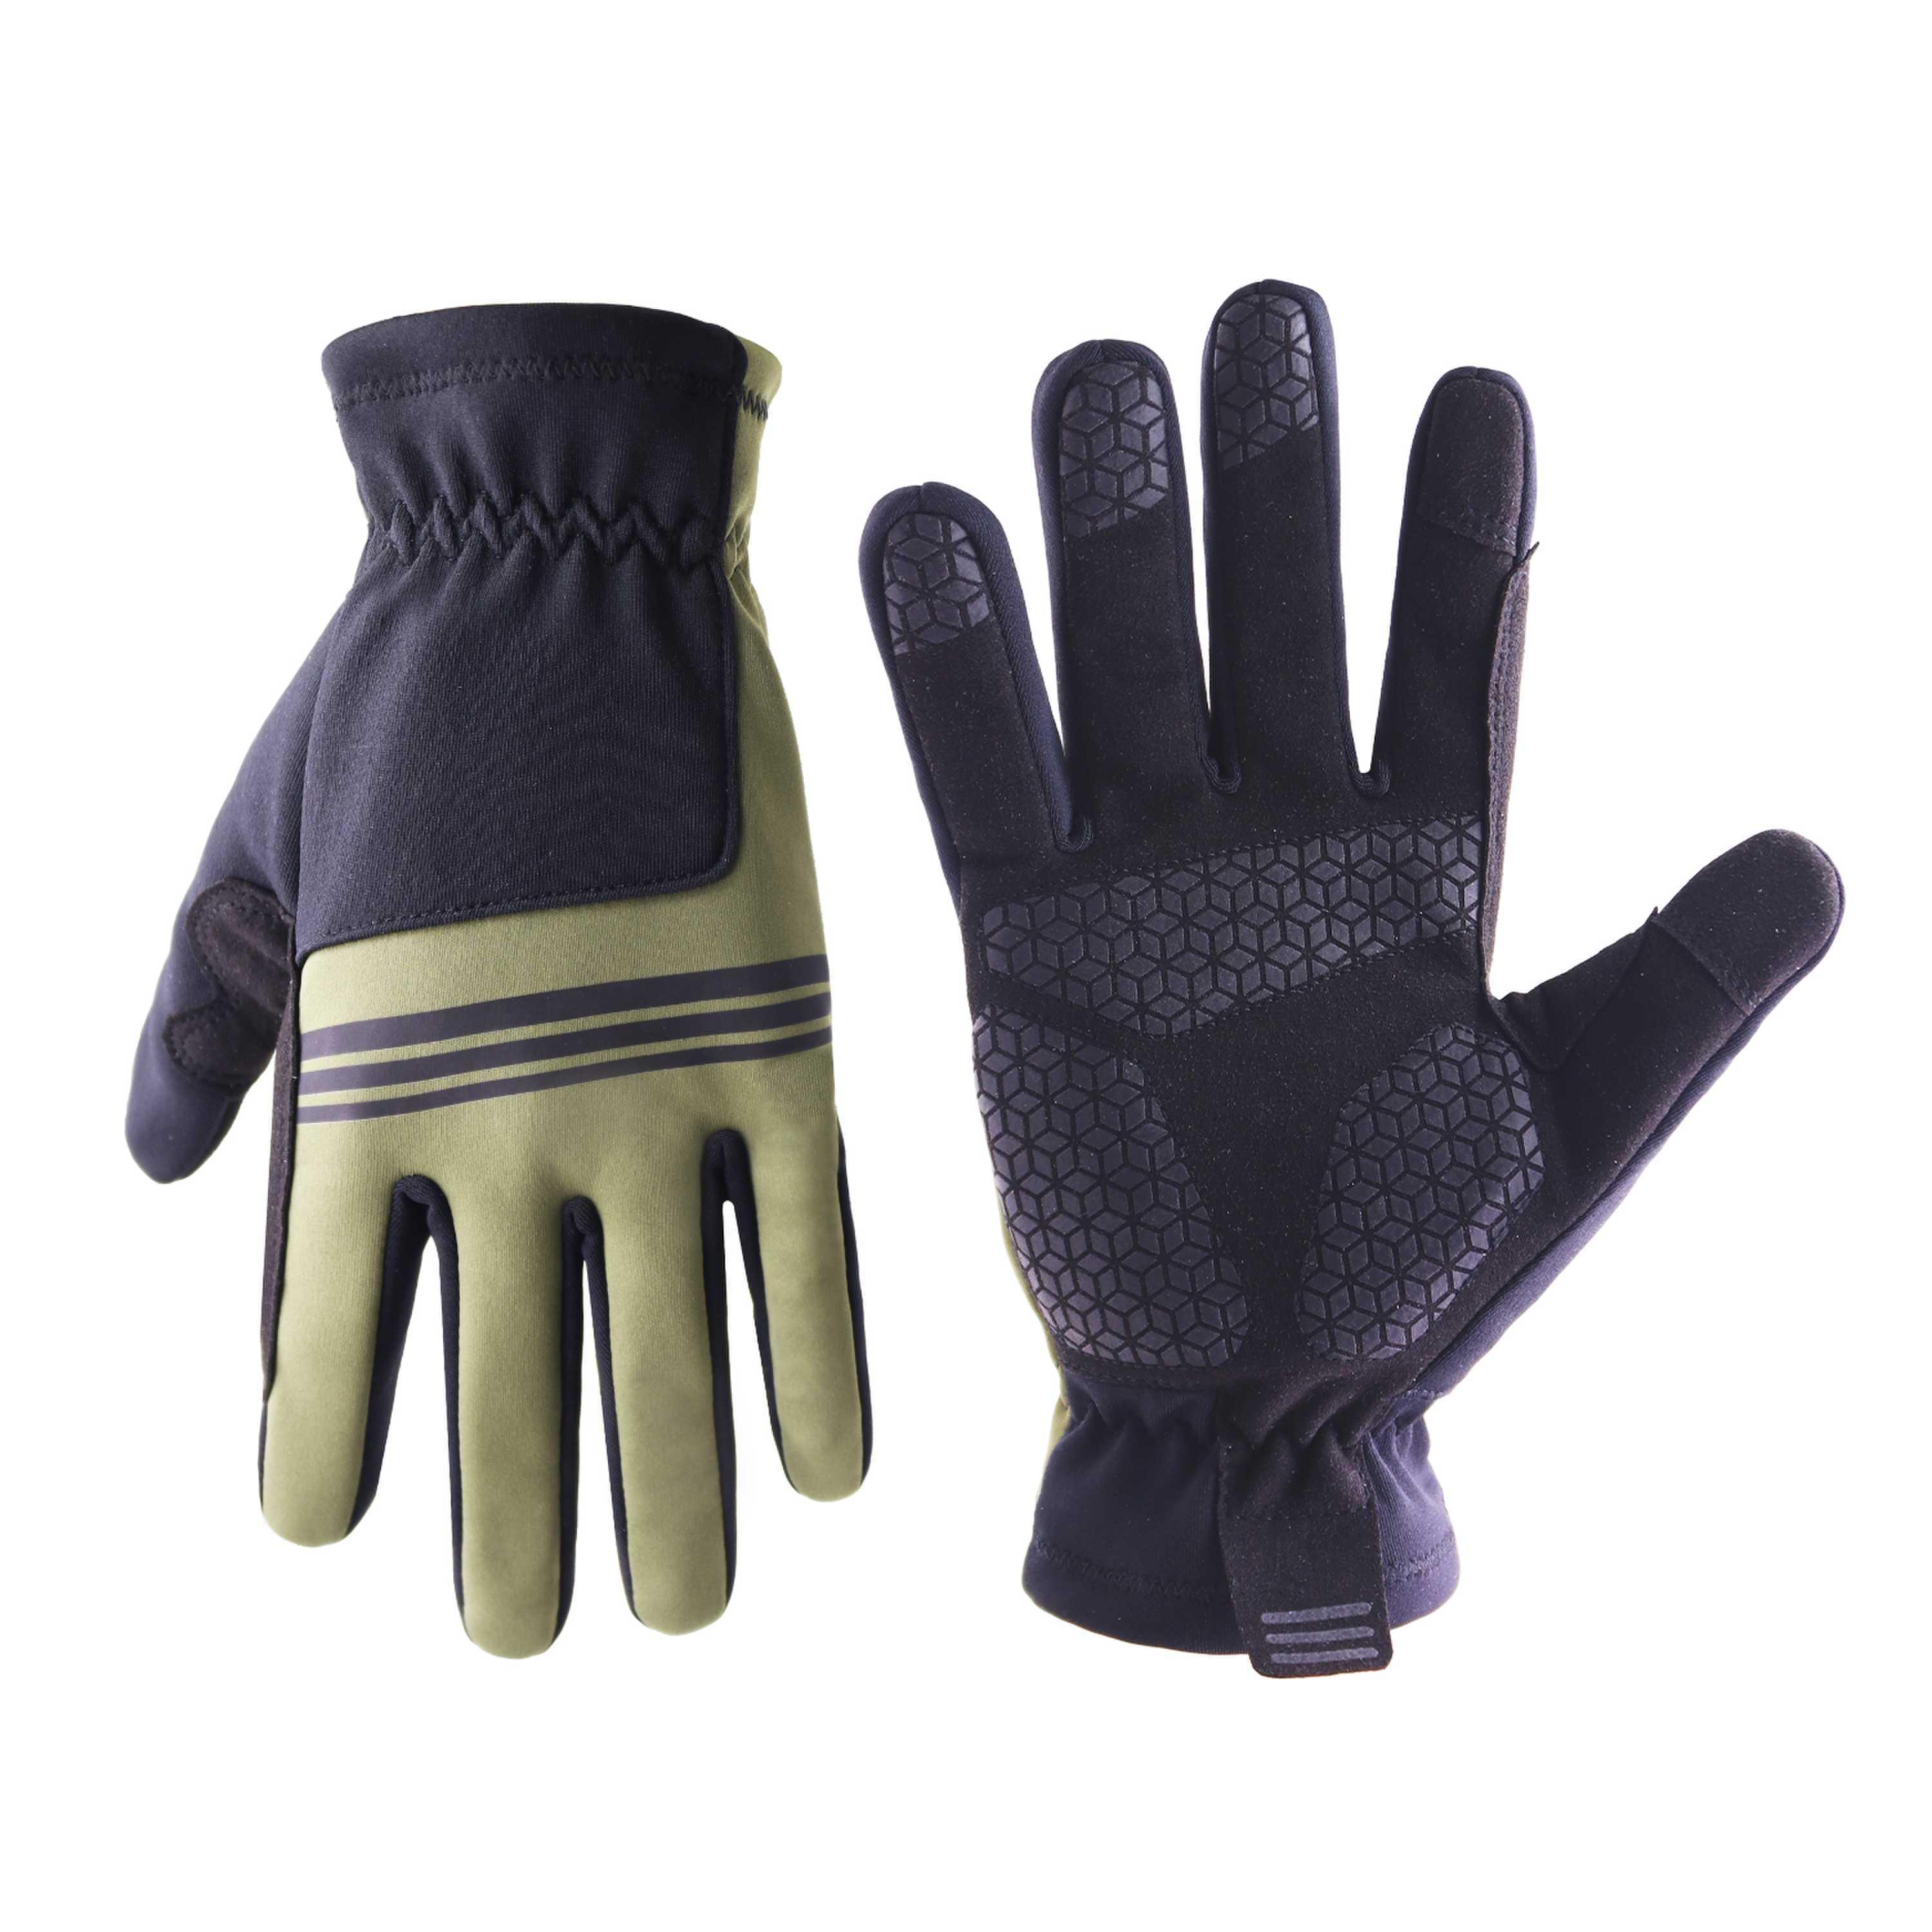 PRI silicone coating reinforced palm patch industrial machinery work gloves with anti-slip touch screen 6227